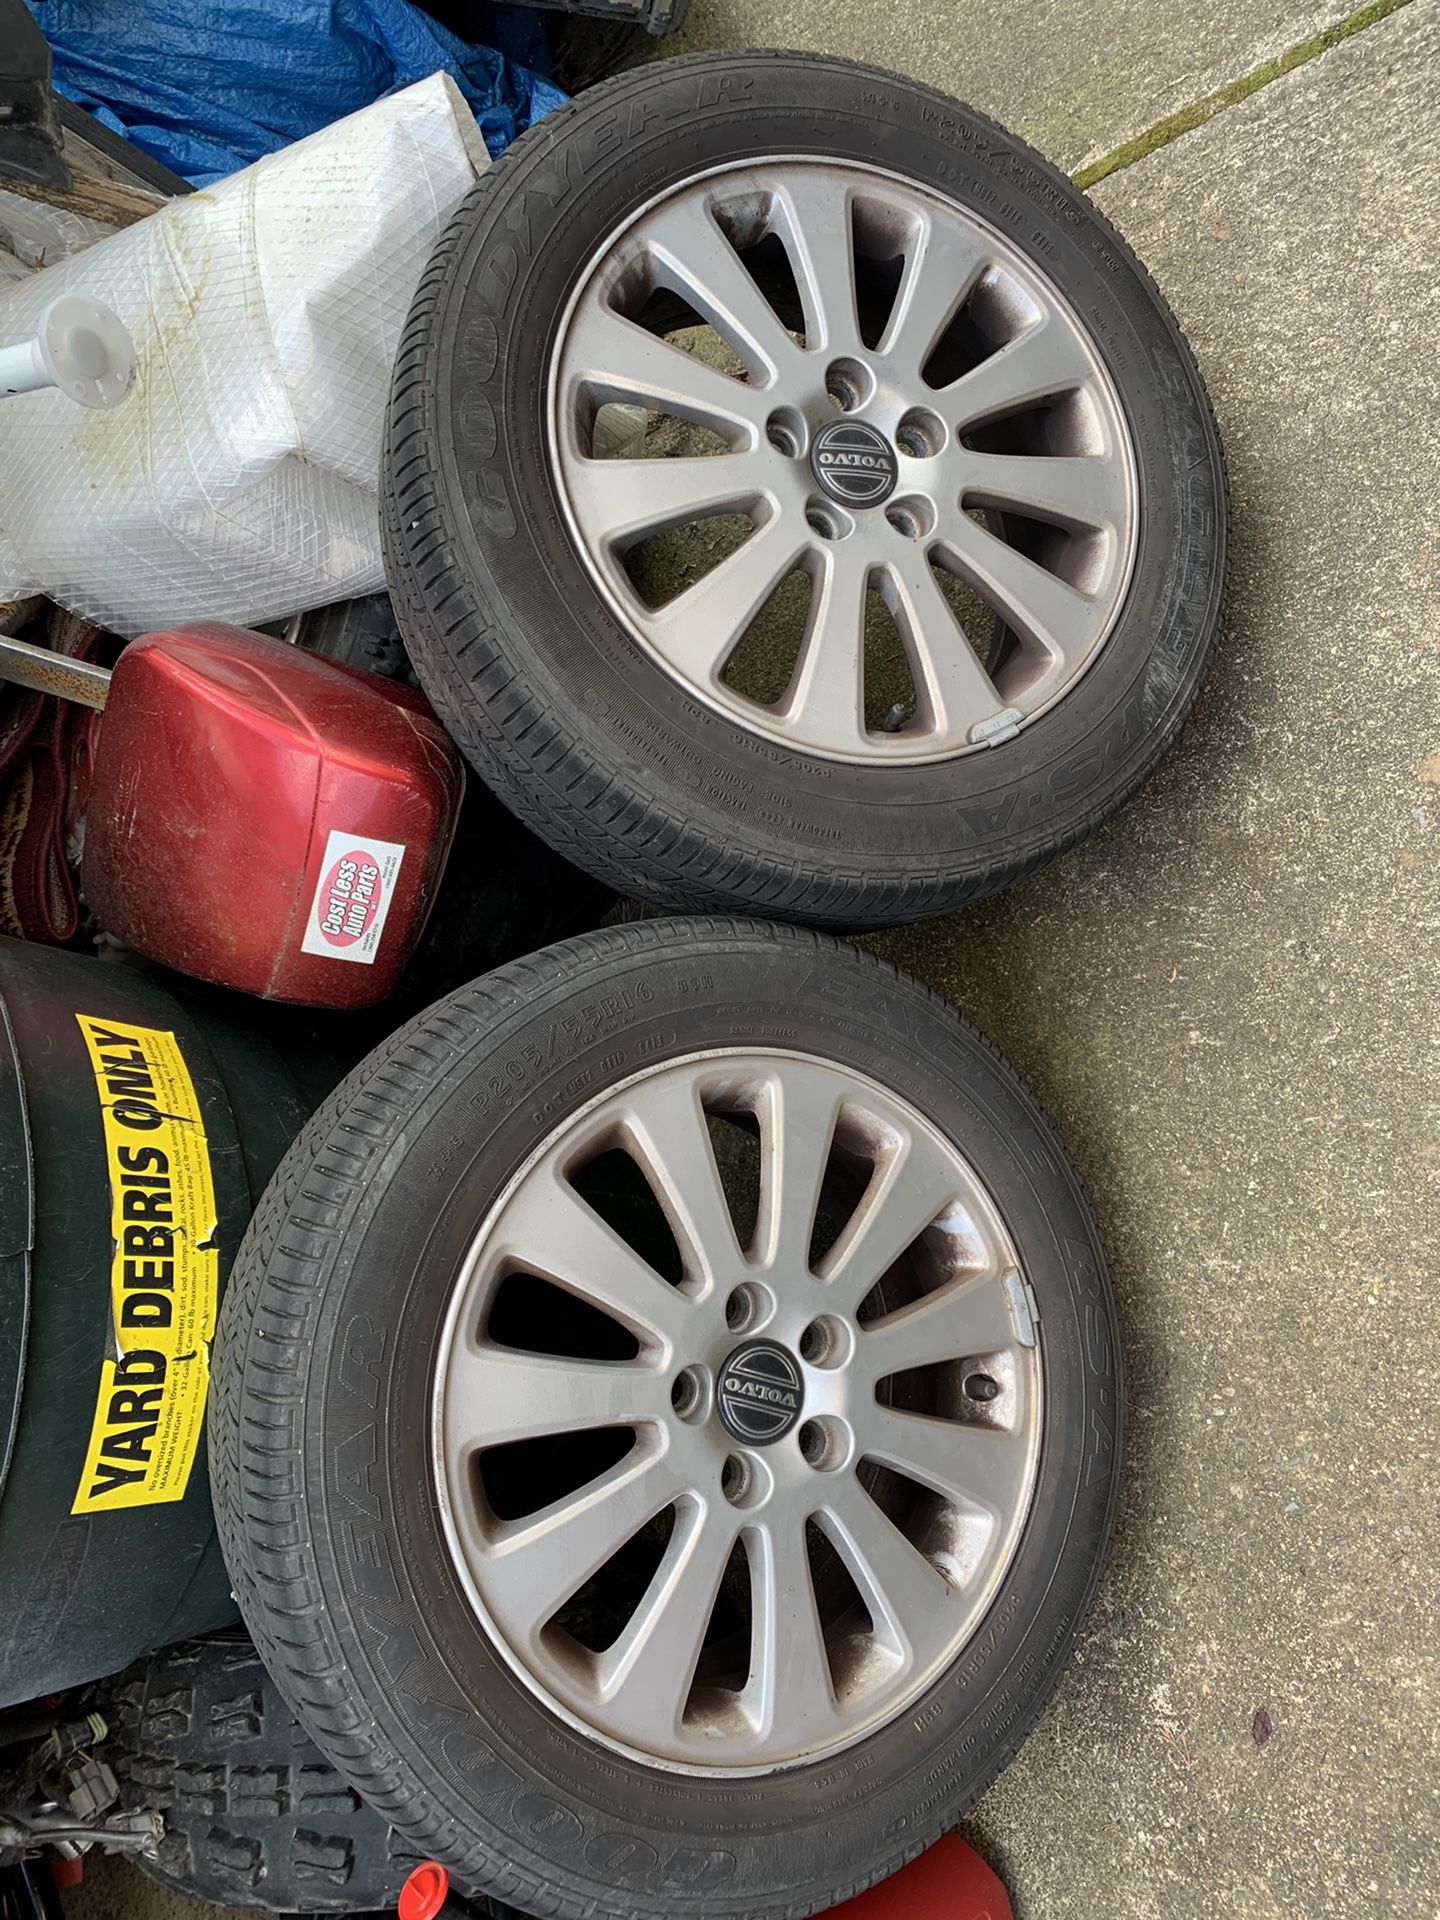 Two Volvo s40 rims with tires.